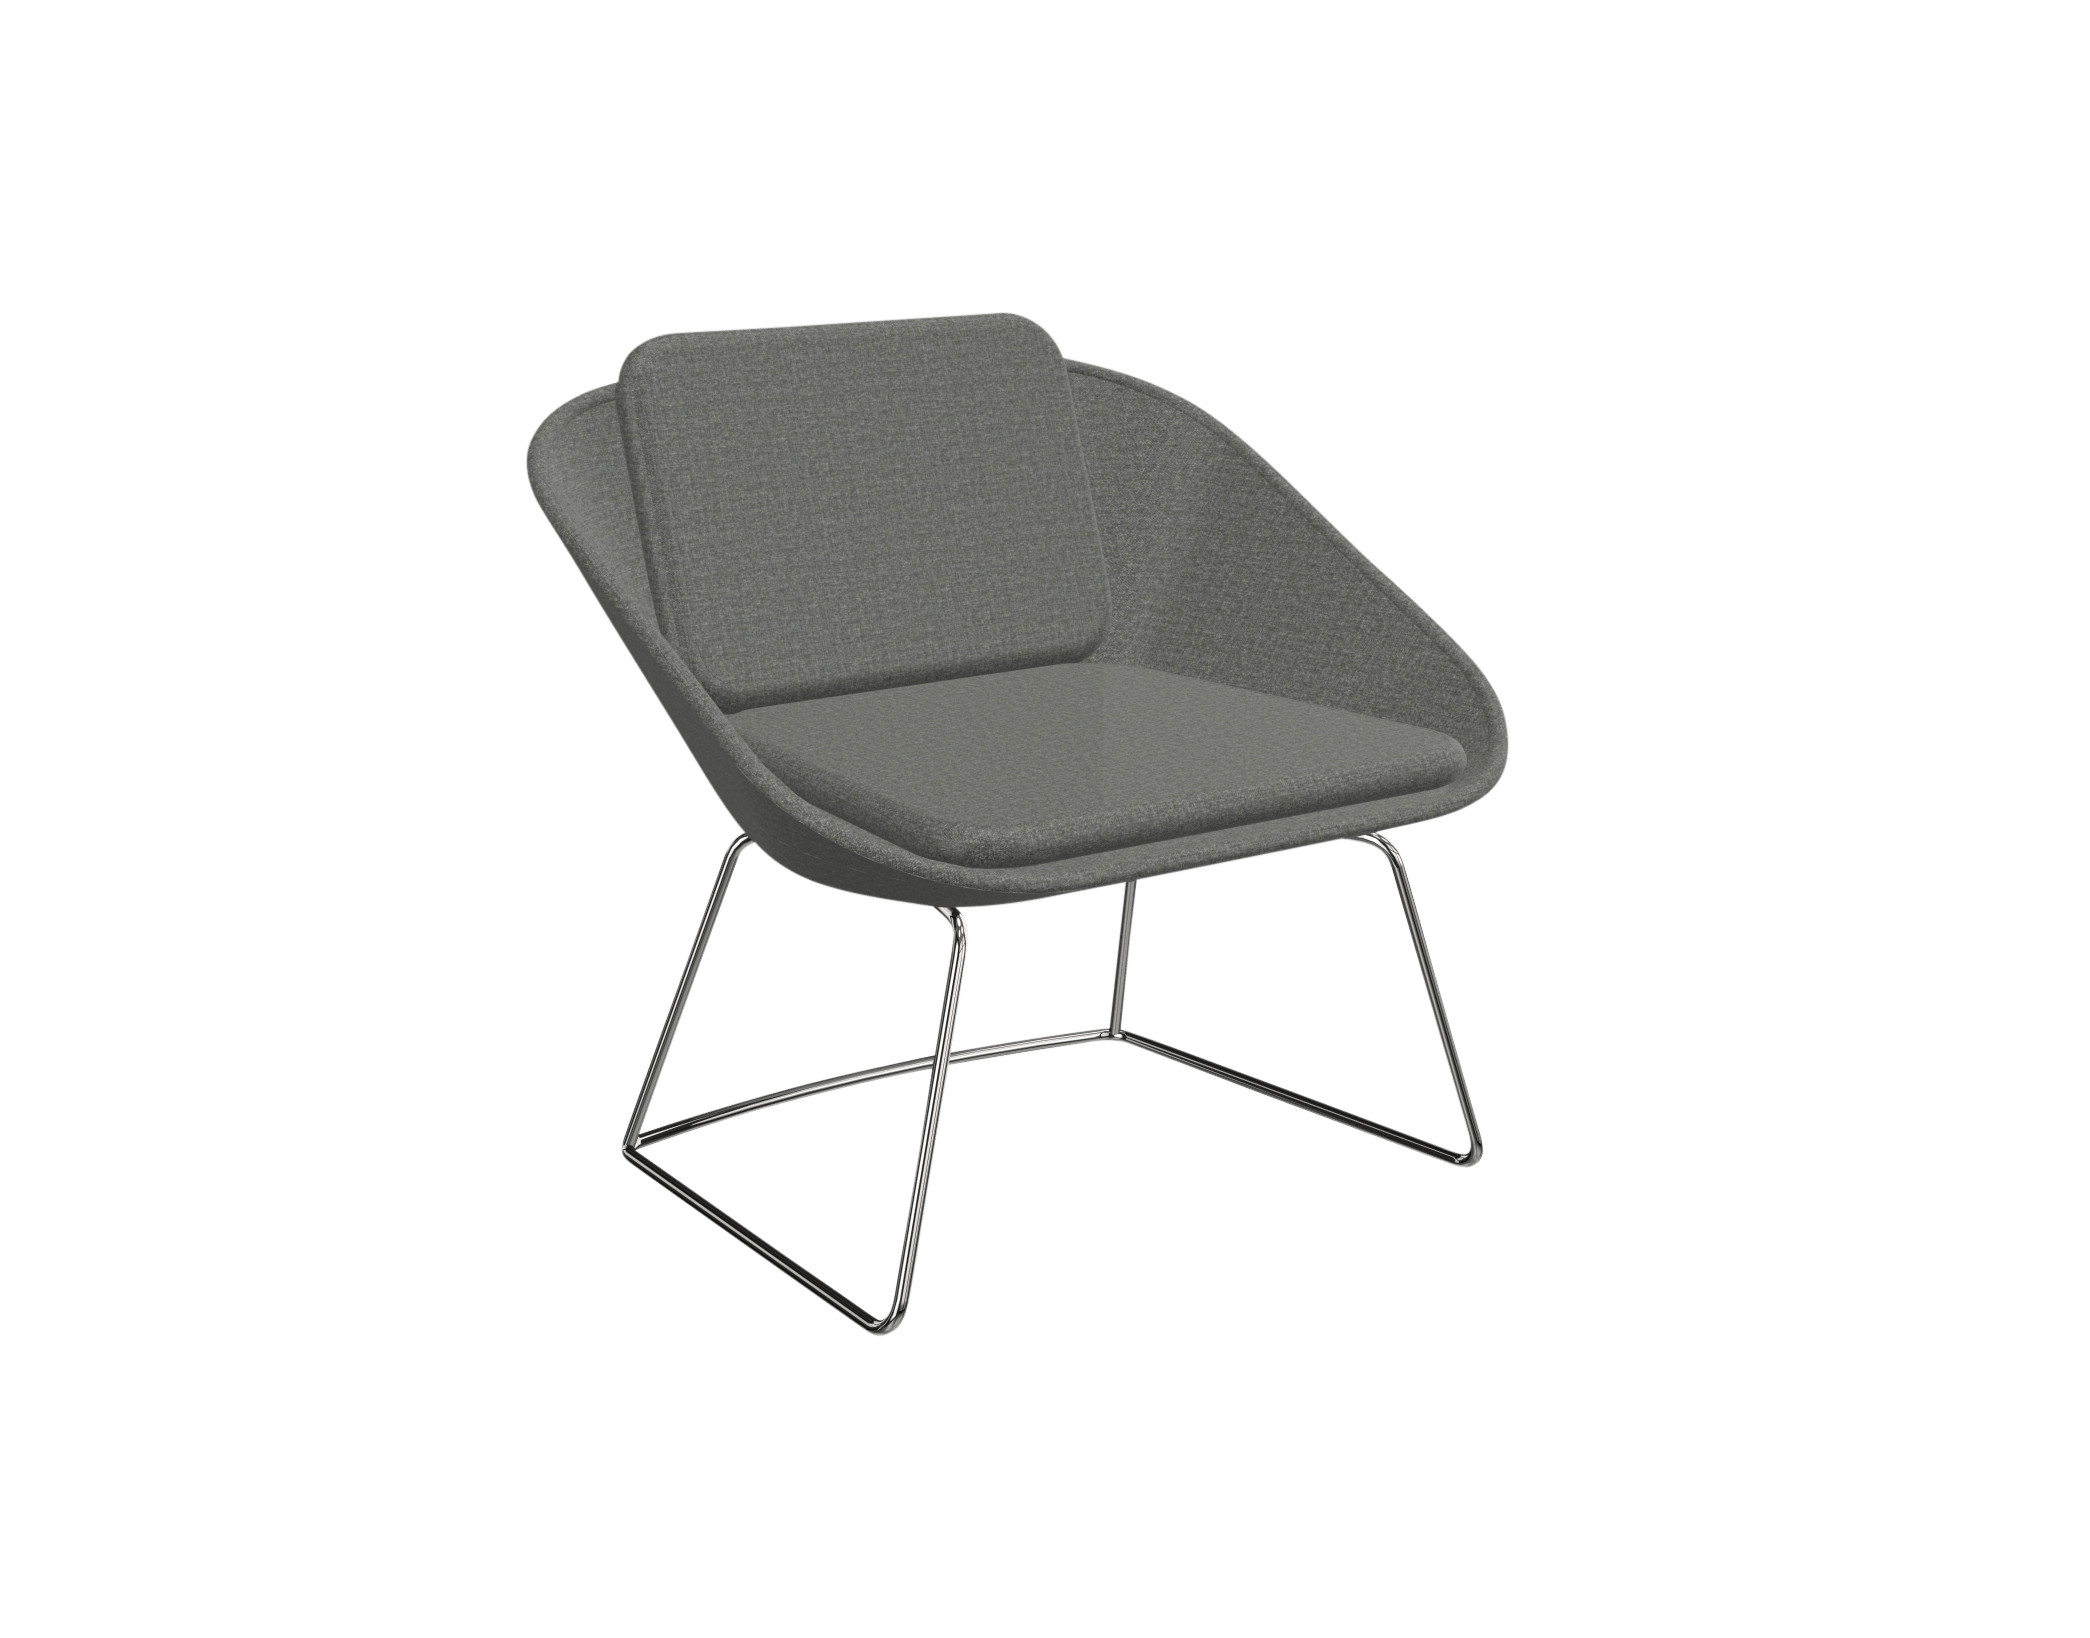 A grey lounge chair with a metal frame.